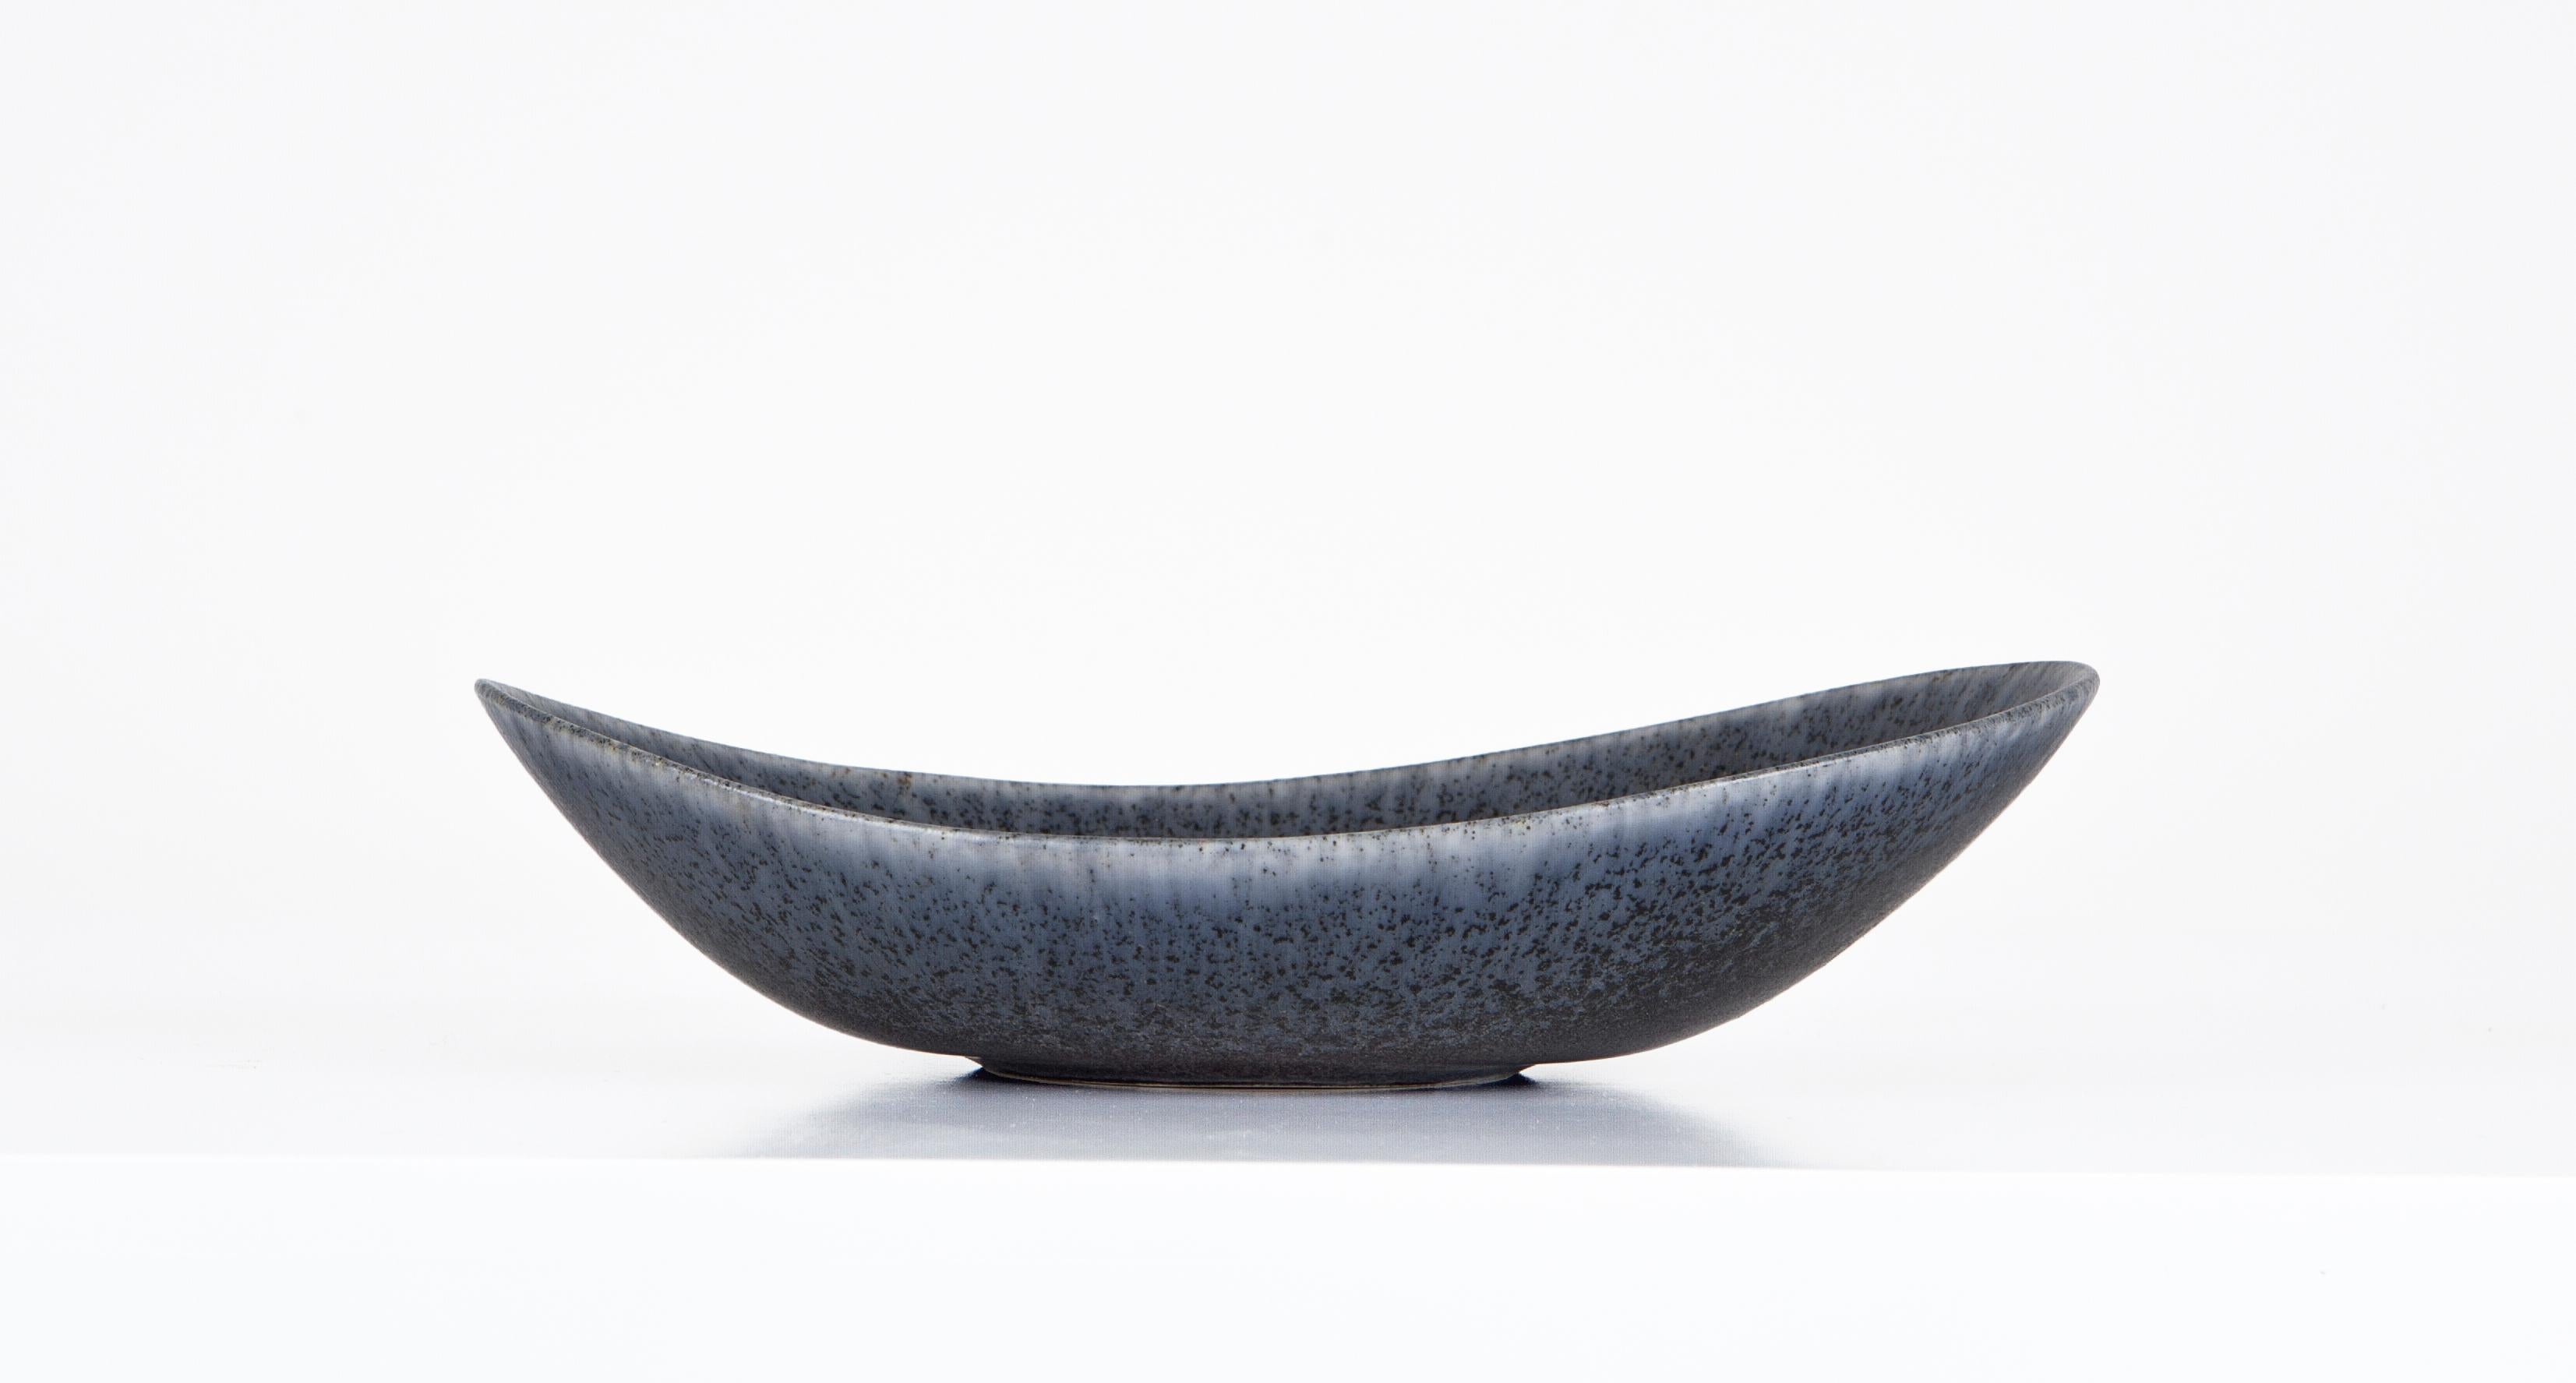 Flat ceramic bowl with eggshell glazing by Carl Harry Stalhane for Rörstrand. This organic shaped Bowl features a grey/blue glazed finnishing with a soft texture. 

Sweden, 1950s.
Very good, vintage product without defects, but which may show